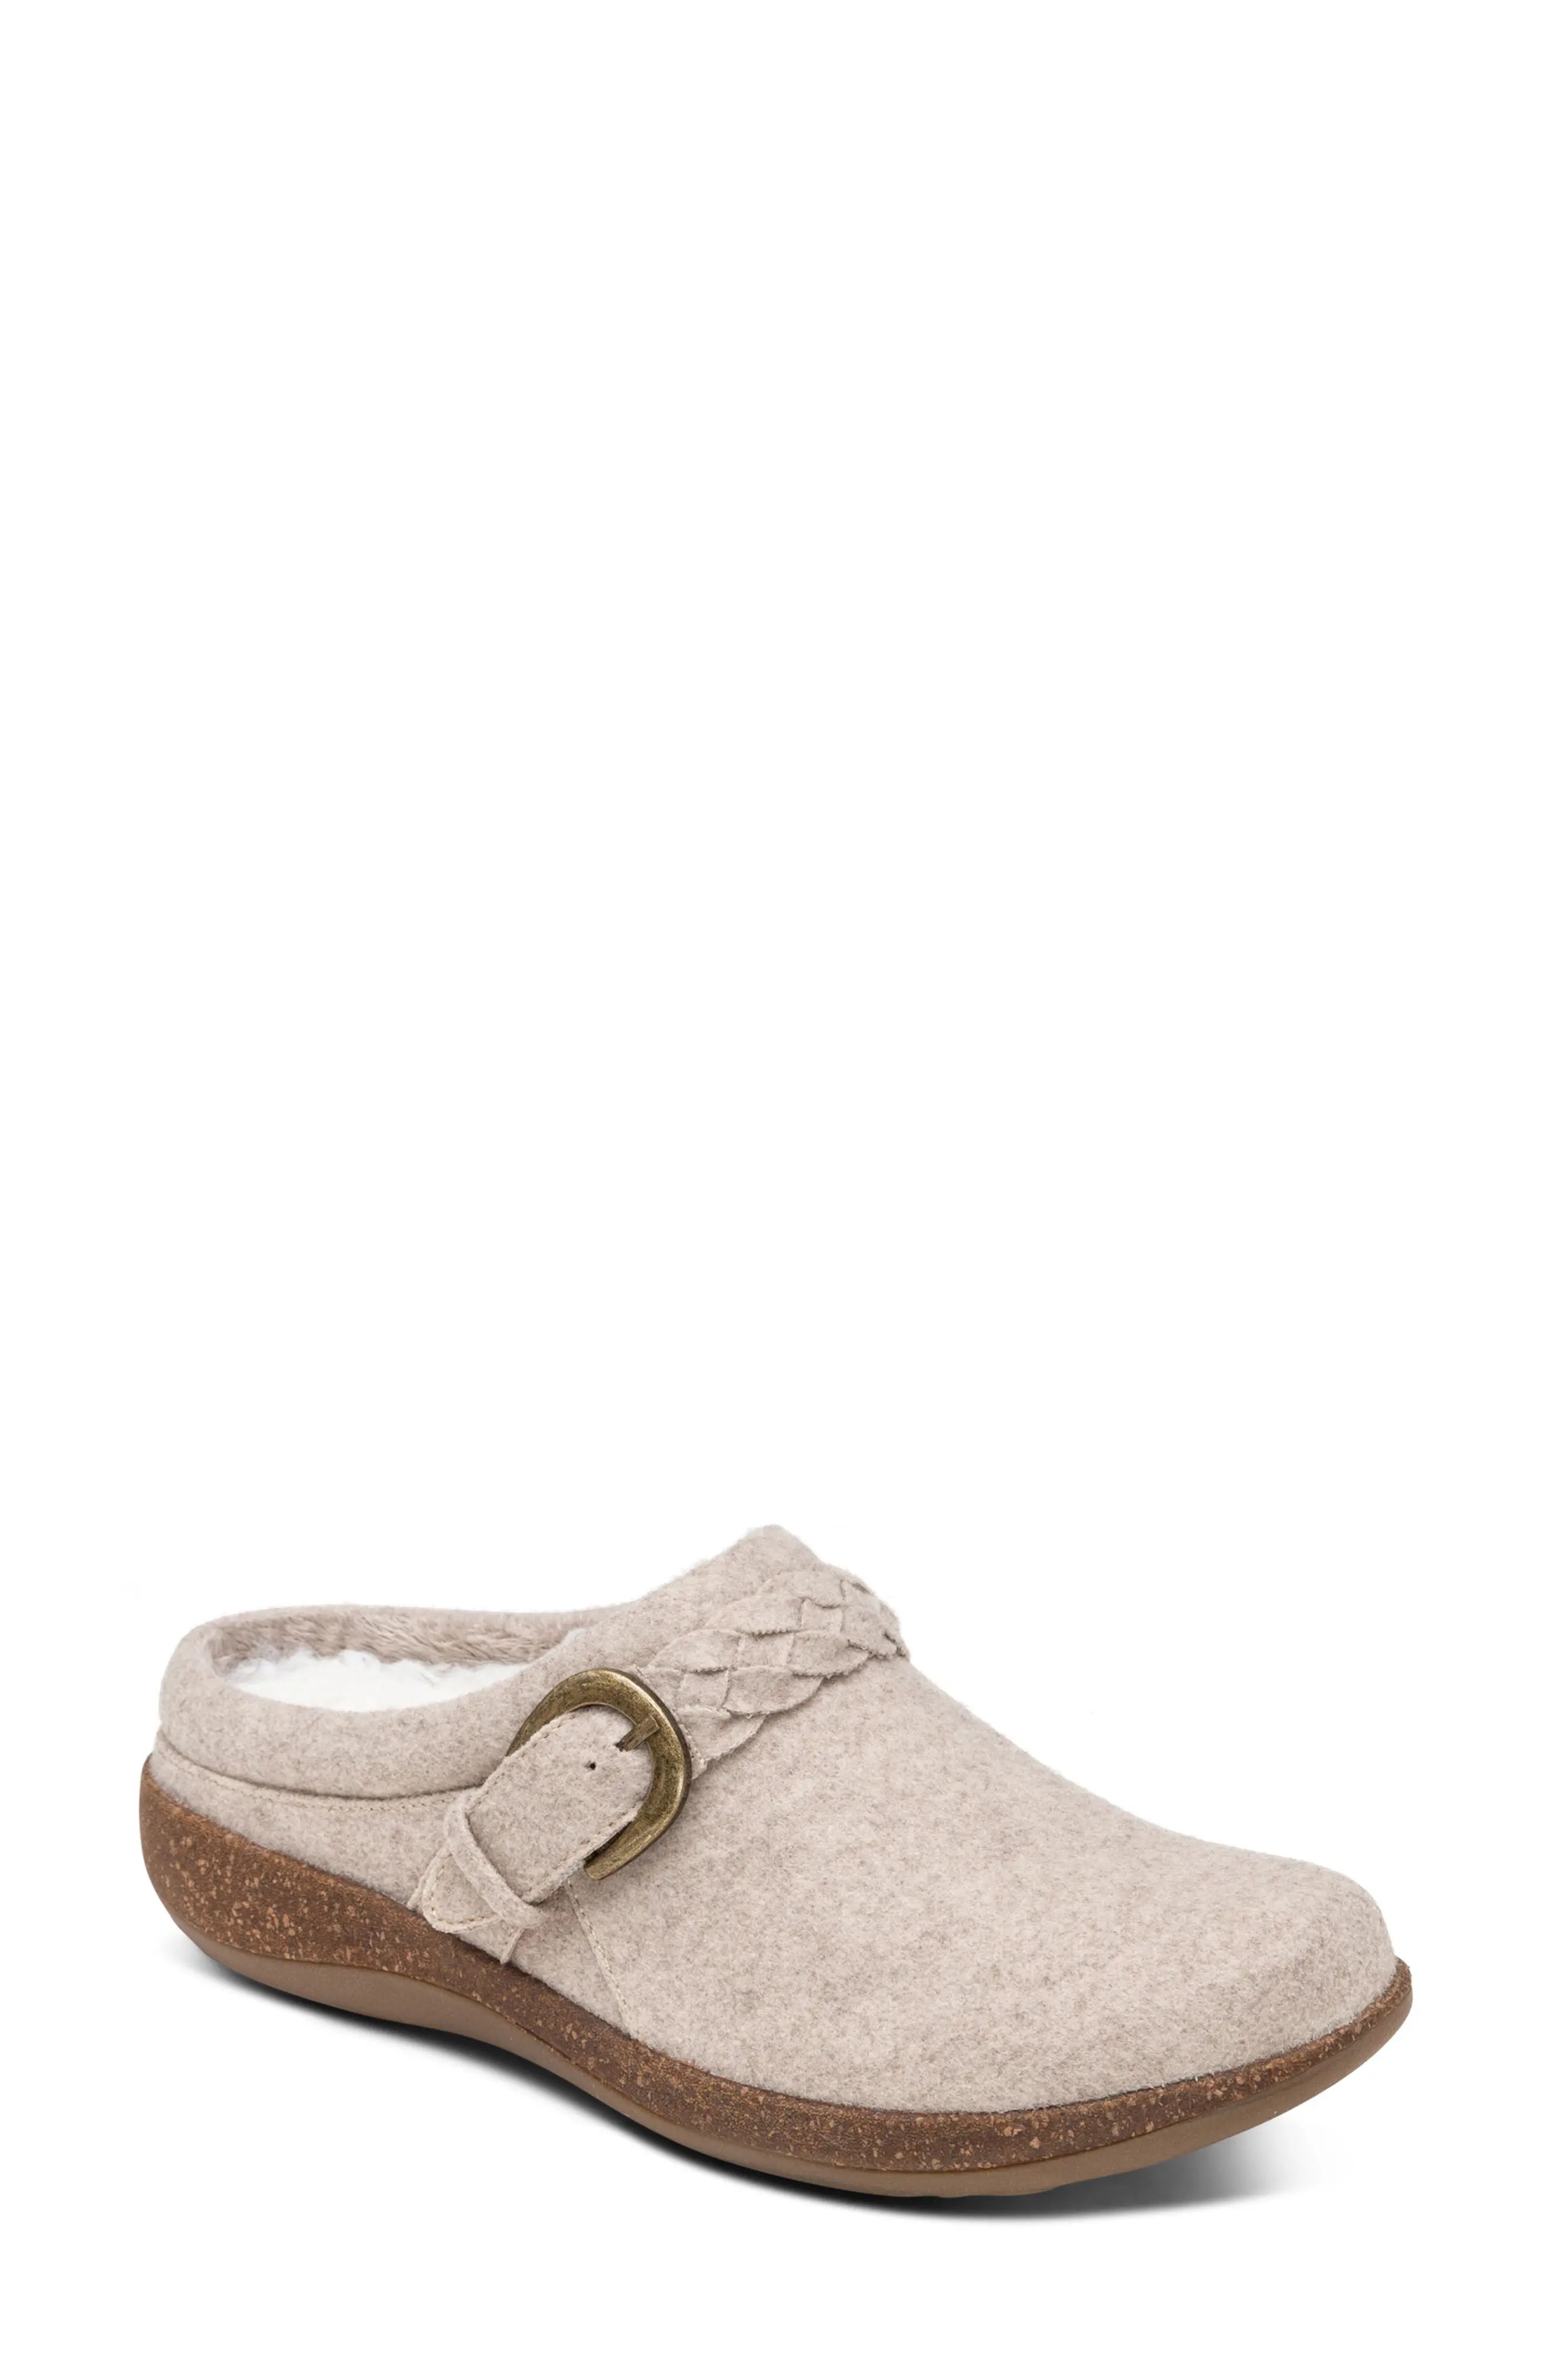 Aetrex Libby Wool Clog in Oatmeal at Nordstrom, Size 9-9.5Us | Nordstrom